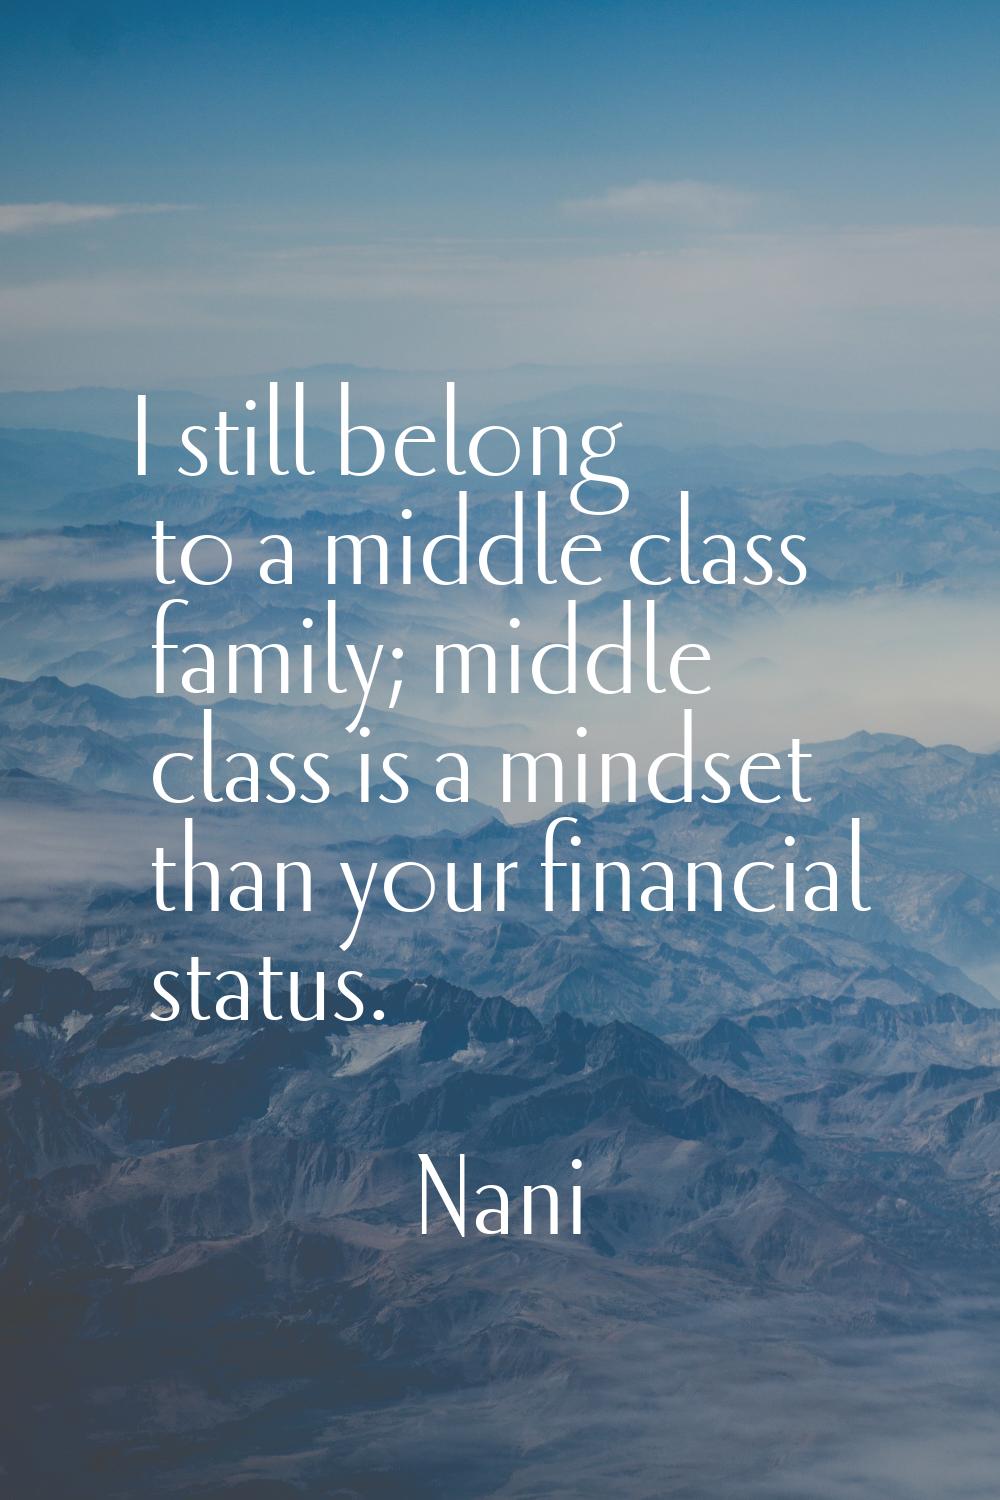 I still belong to a middle class family; middle class is a mindset than your financial status.